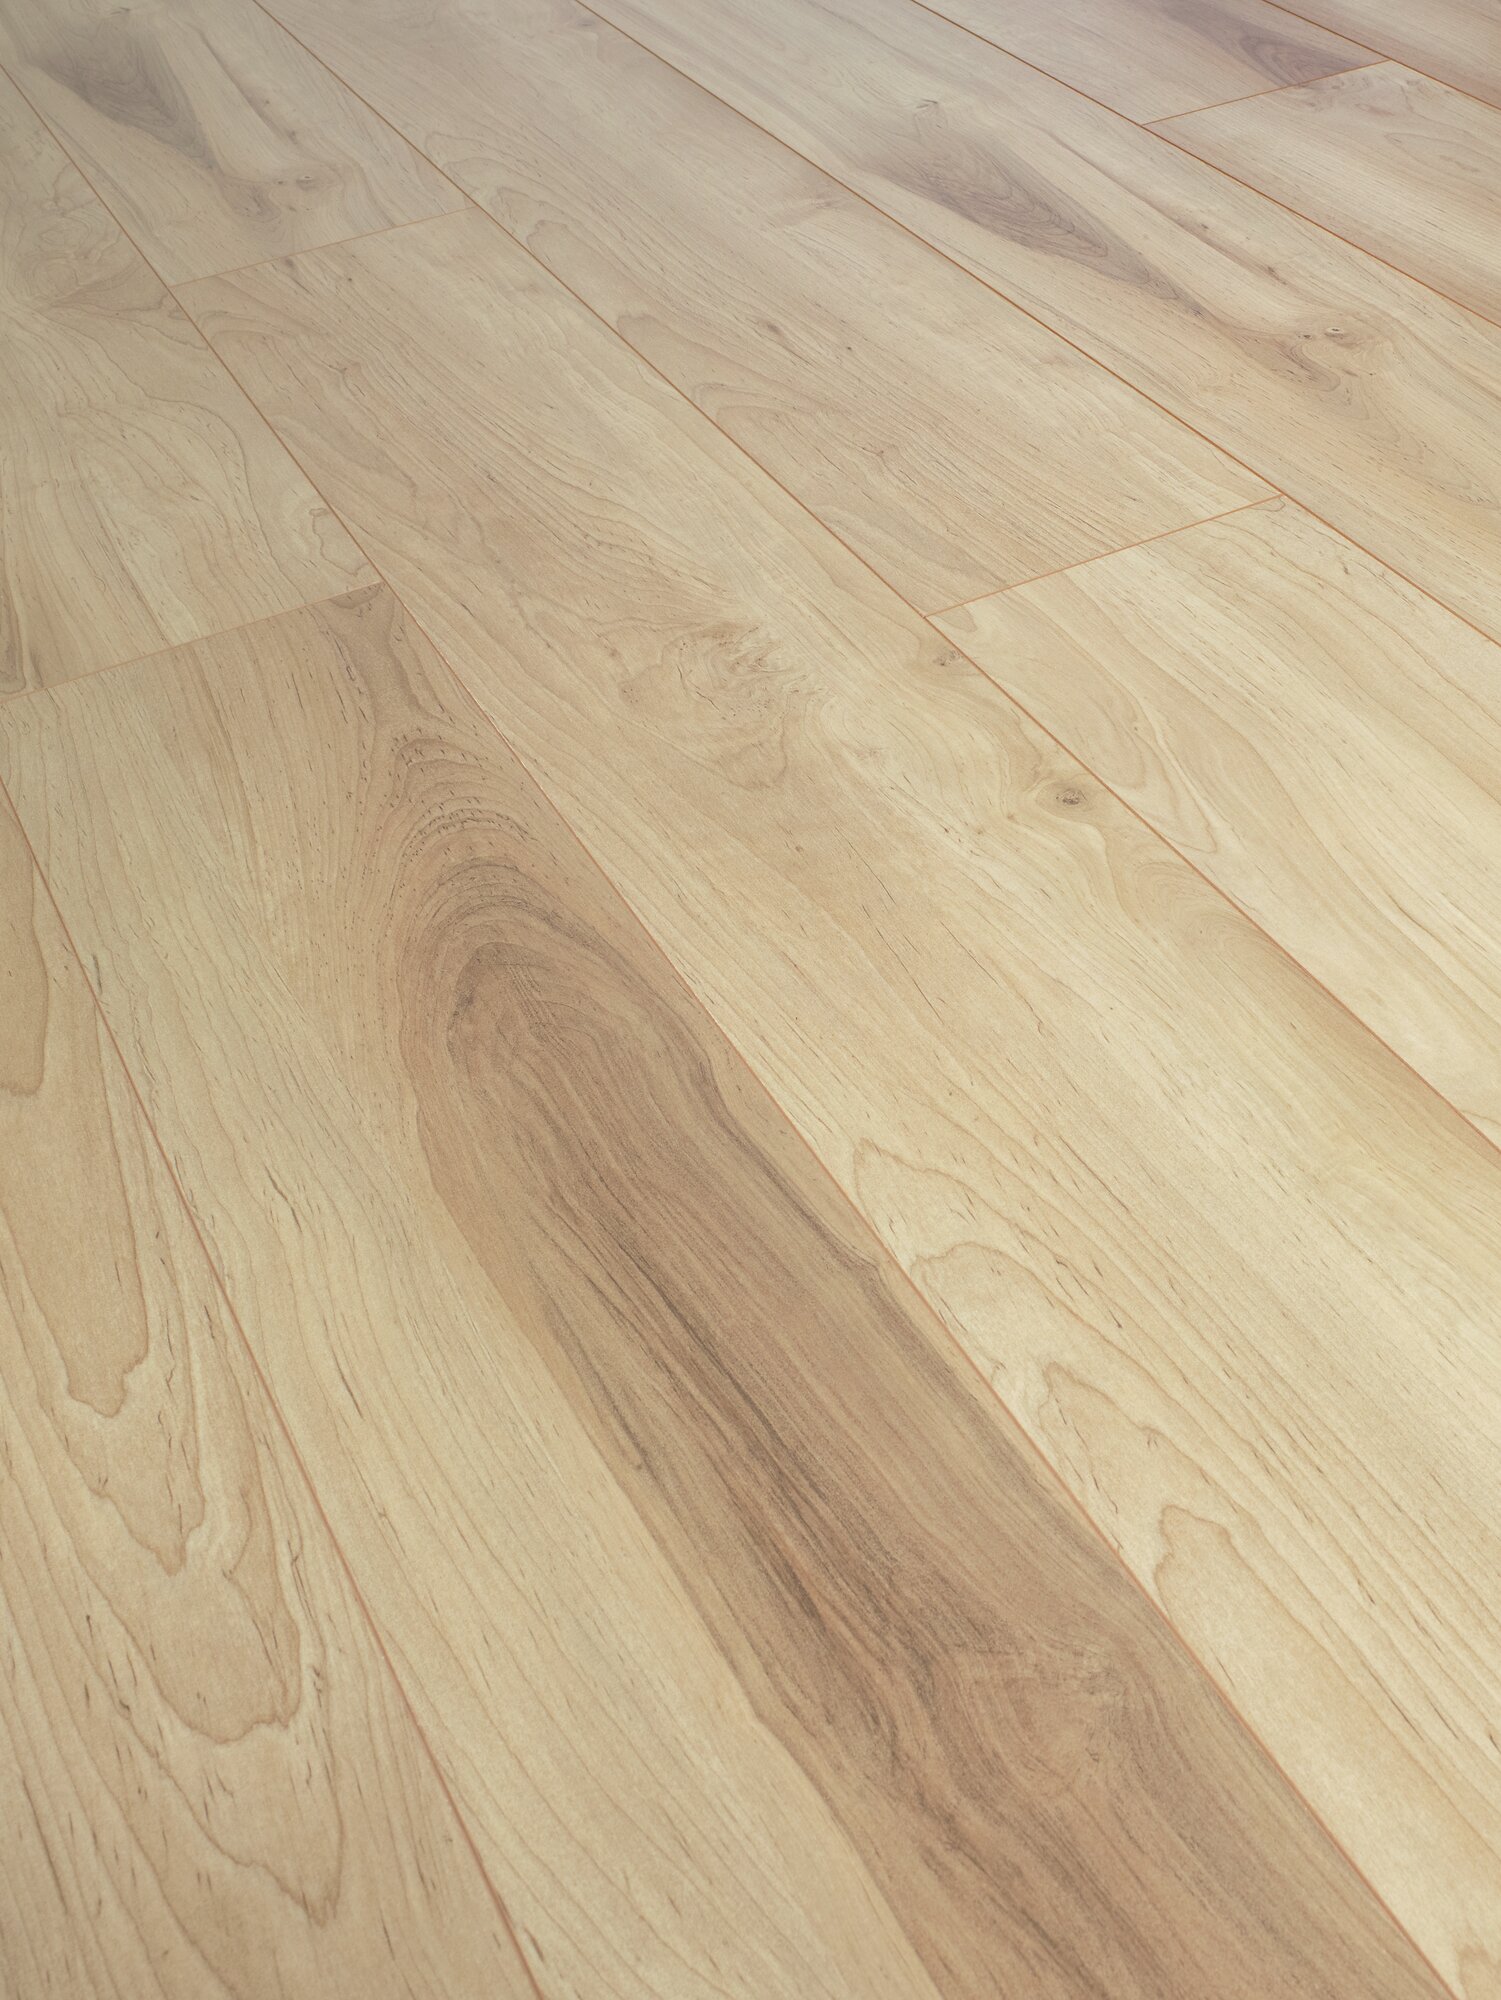 Swiss Liberty D4659 Natural Maple, How To Clean Swiss Krono Laminate Flooring